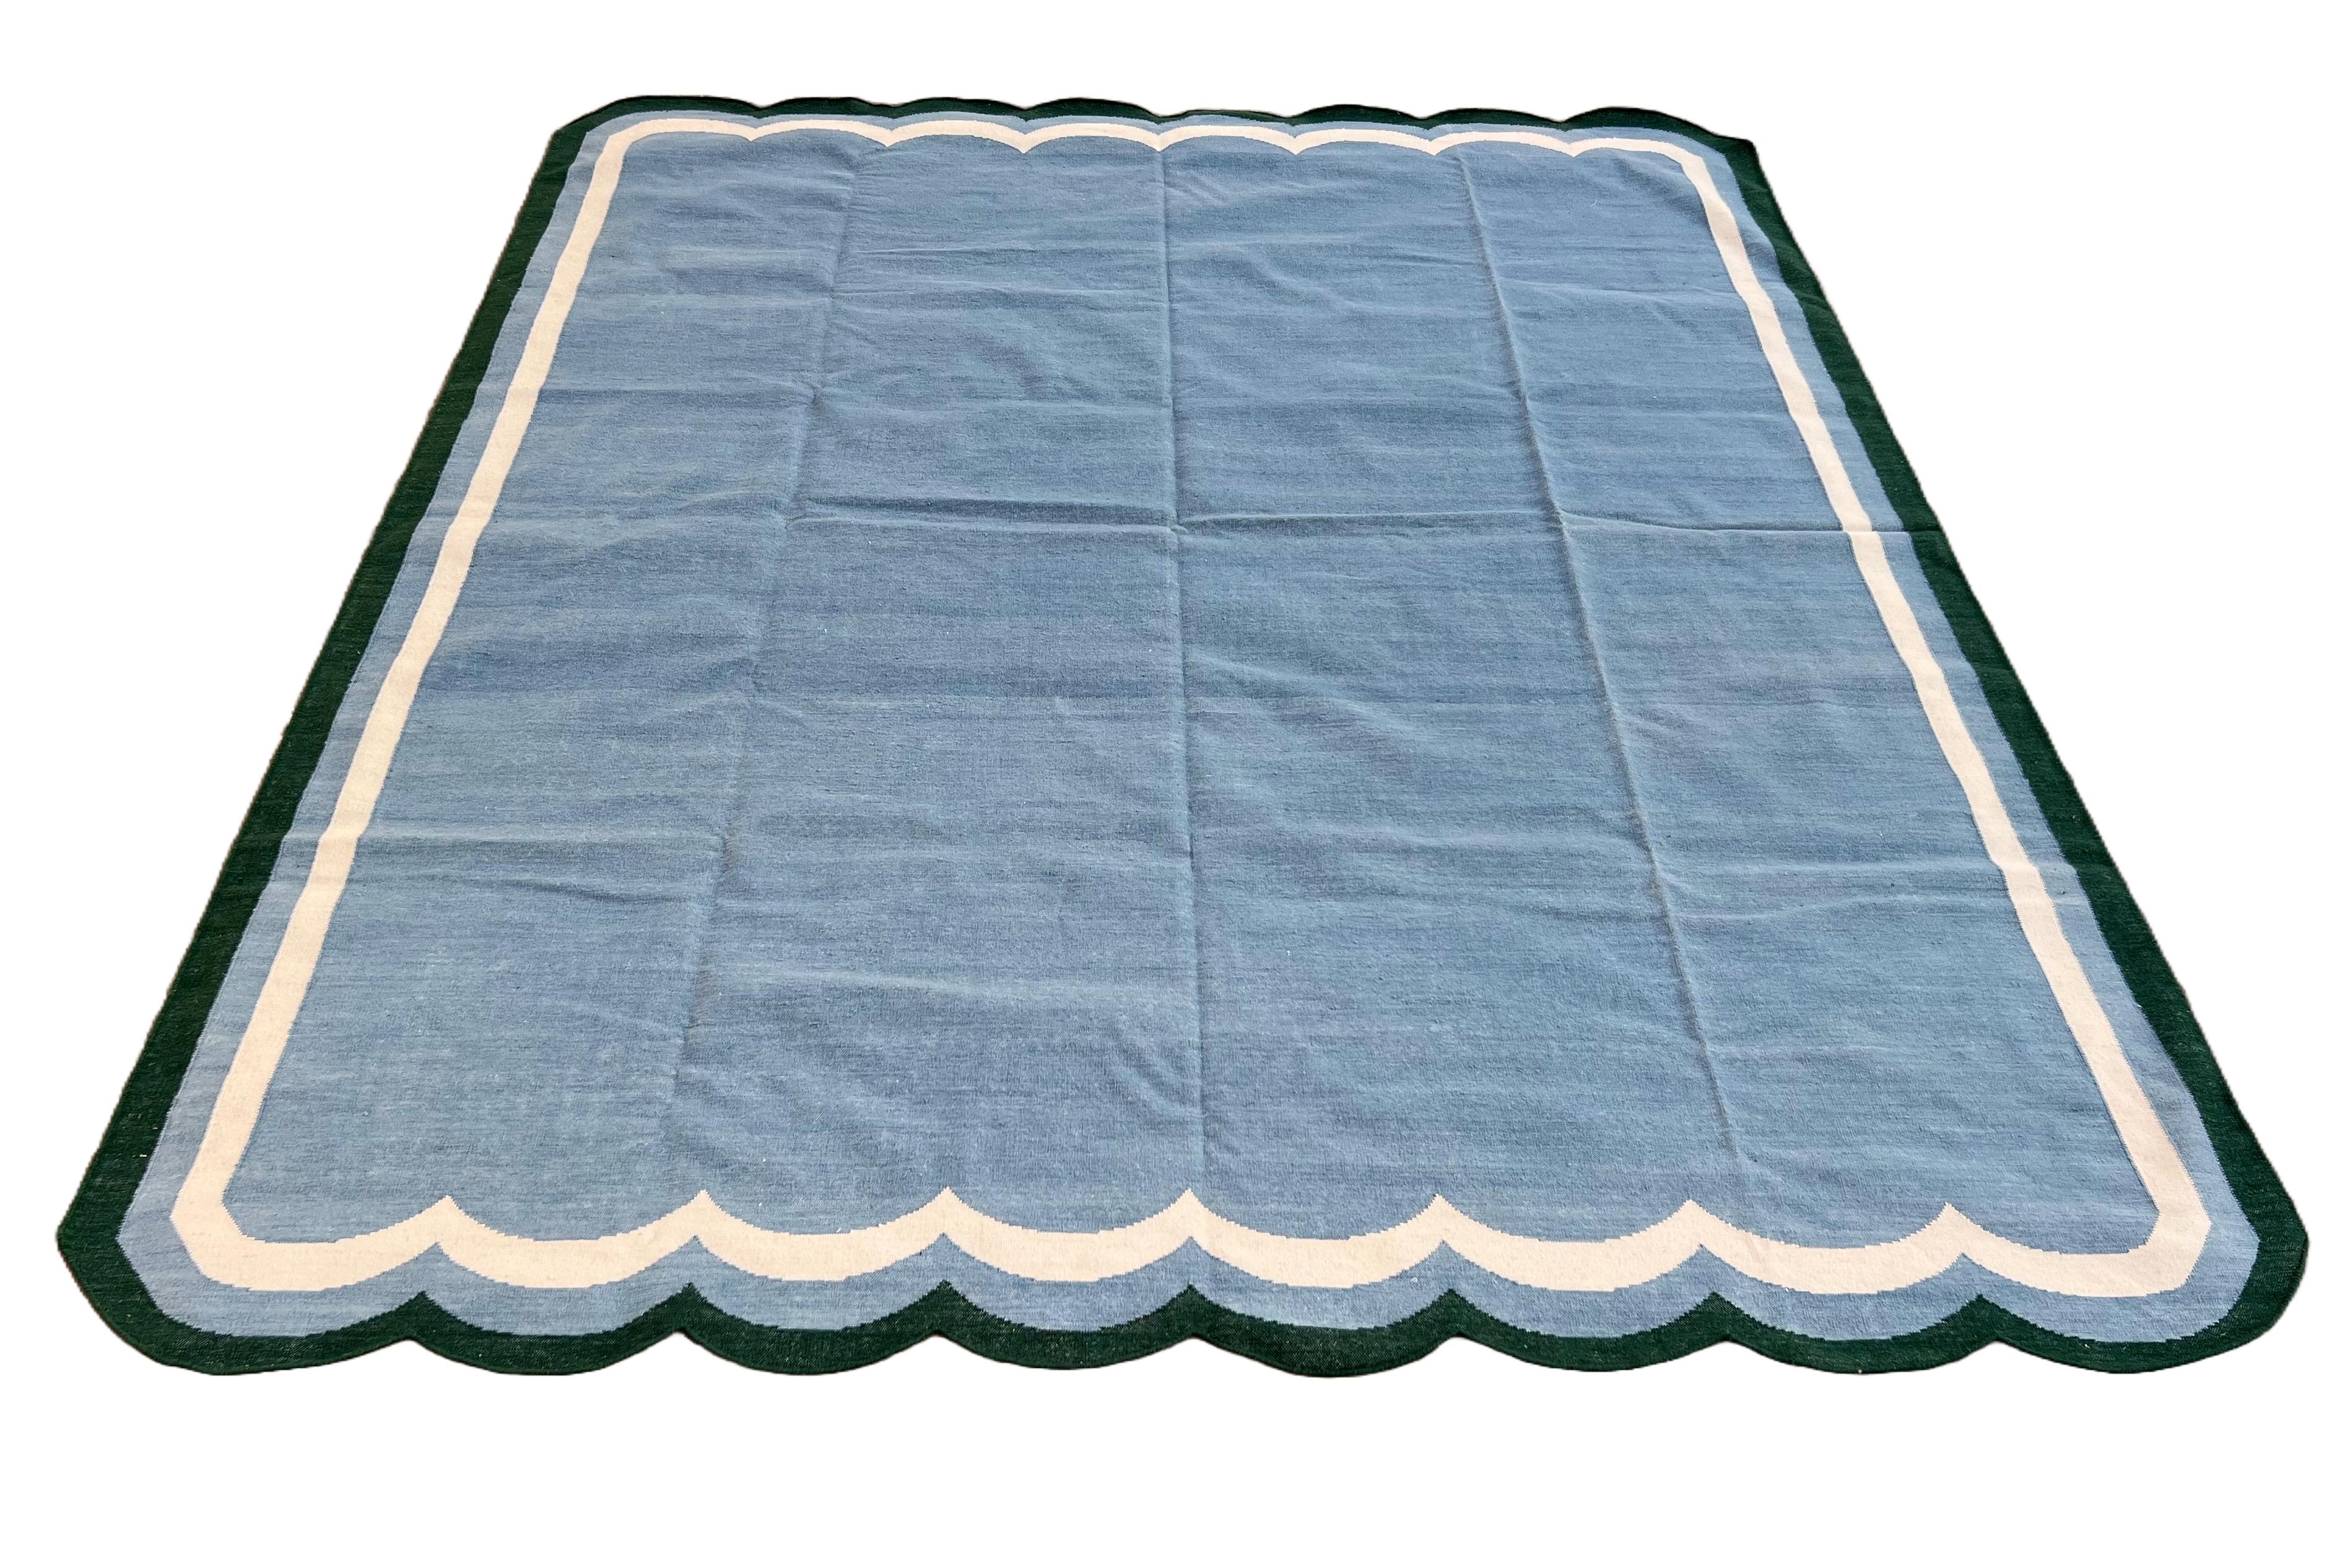 Handmade Woolen Area Flat Weave Rug, 8x10 Blue And Green Scallop Indian Dhurrie For Sale 2